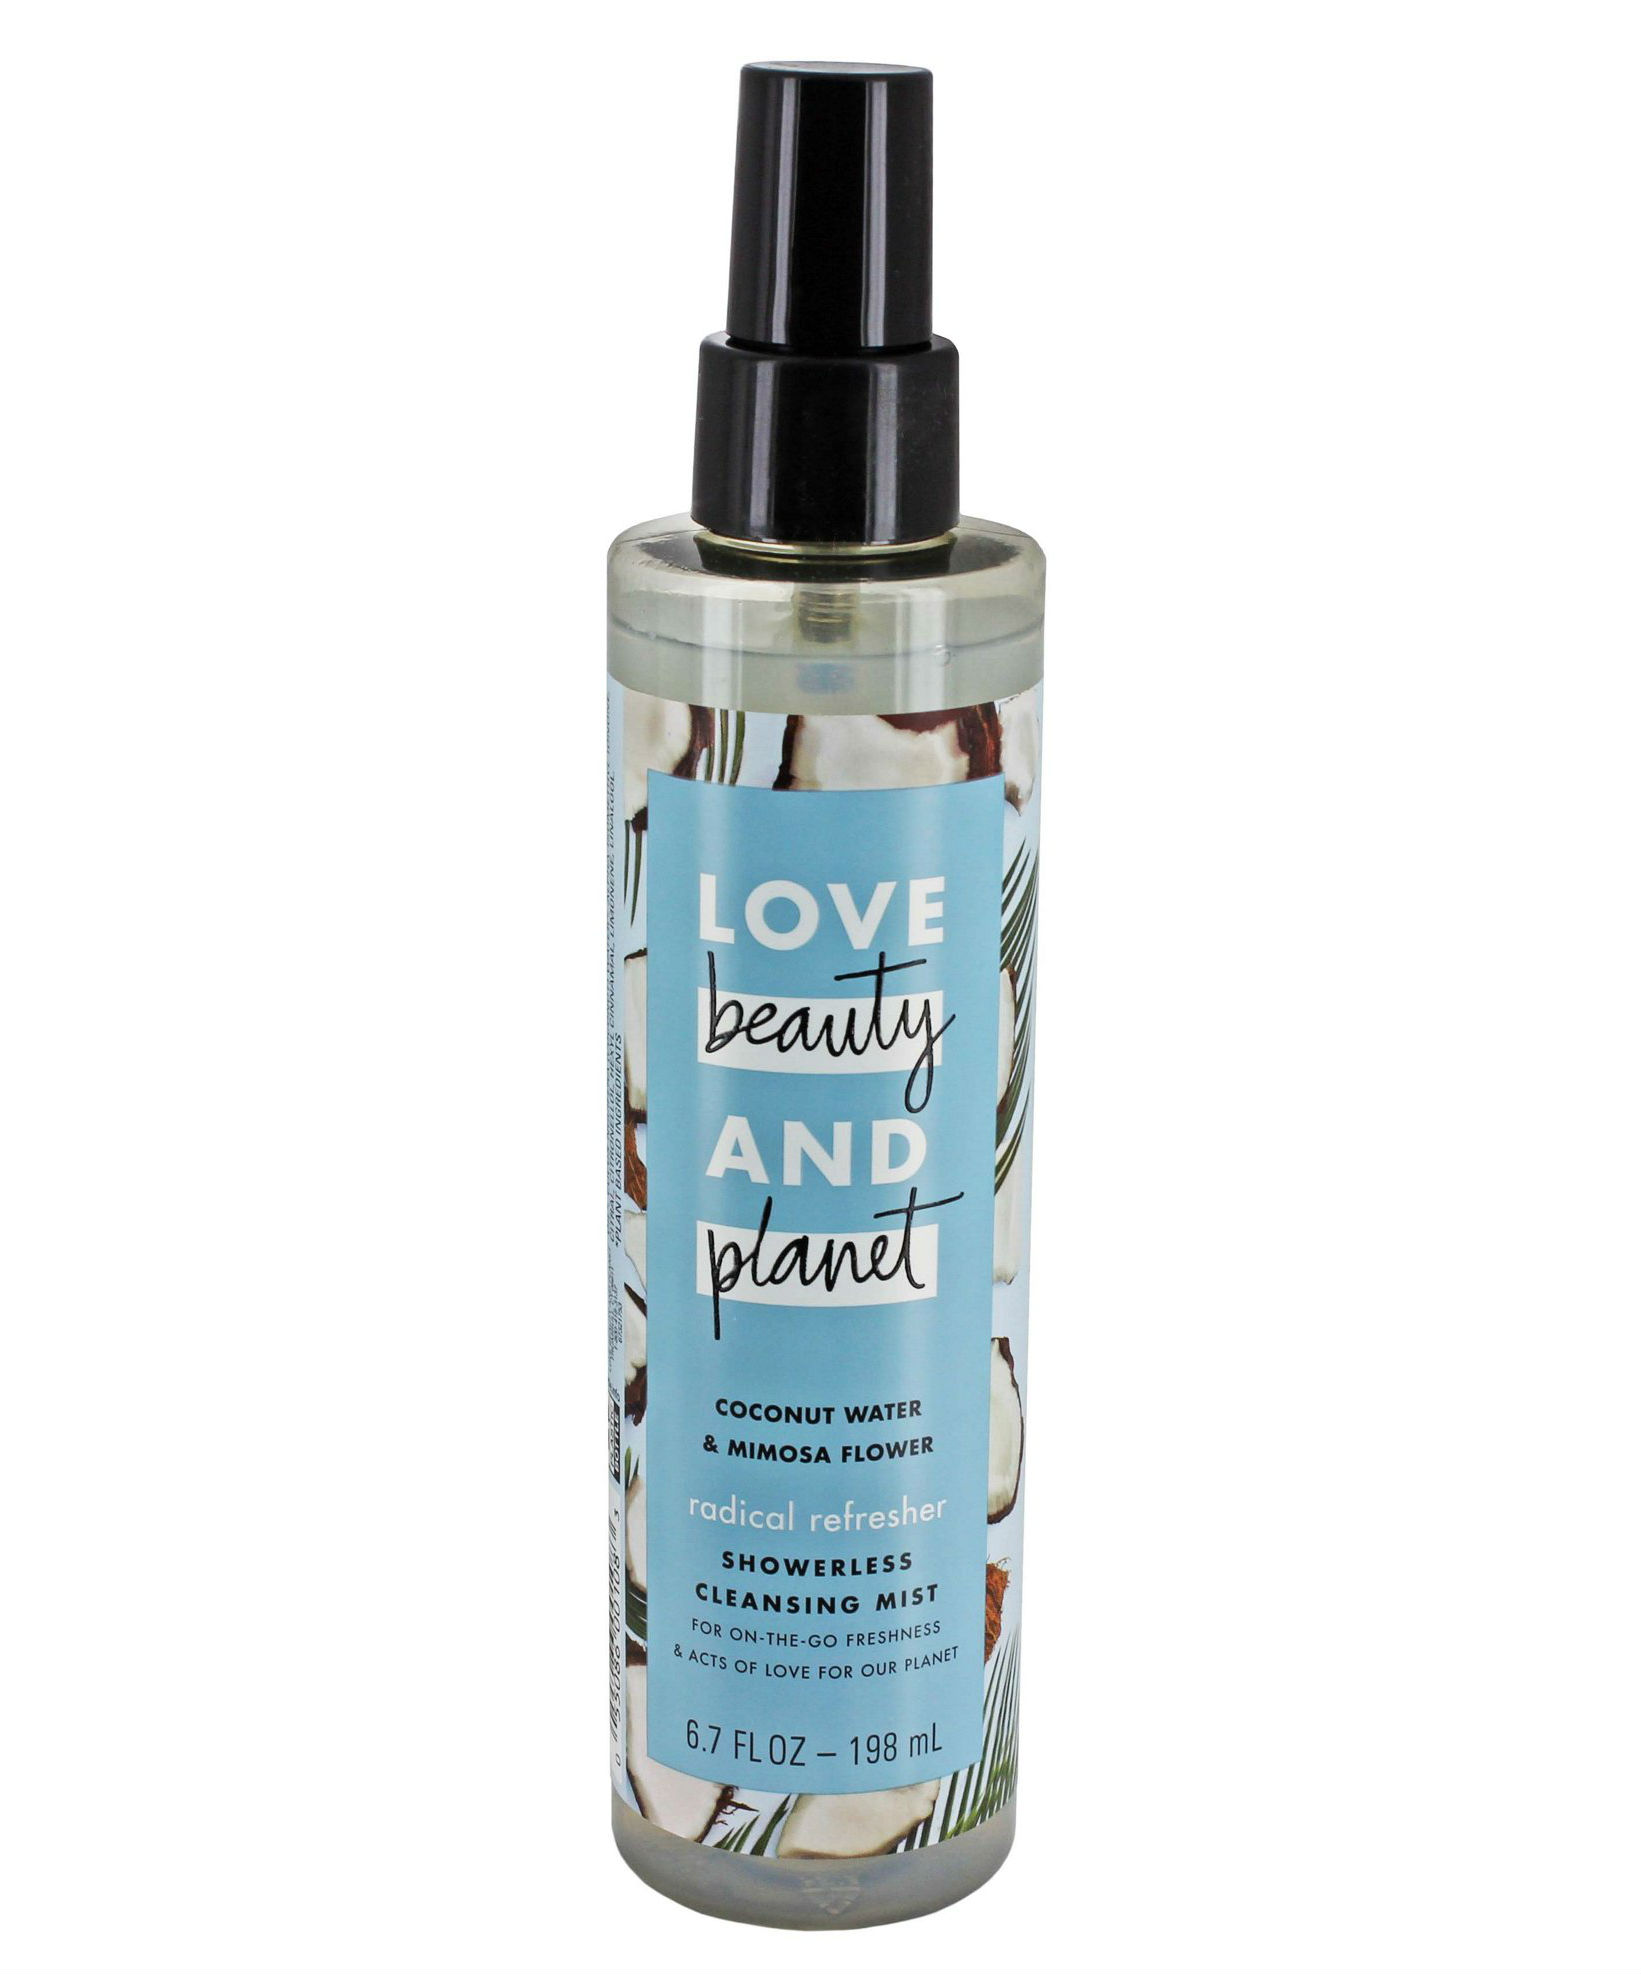 Love Beauty and Planet Coconut Water & Mimosa Flower Showerless Cleansing Mist, $6.98